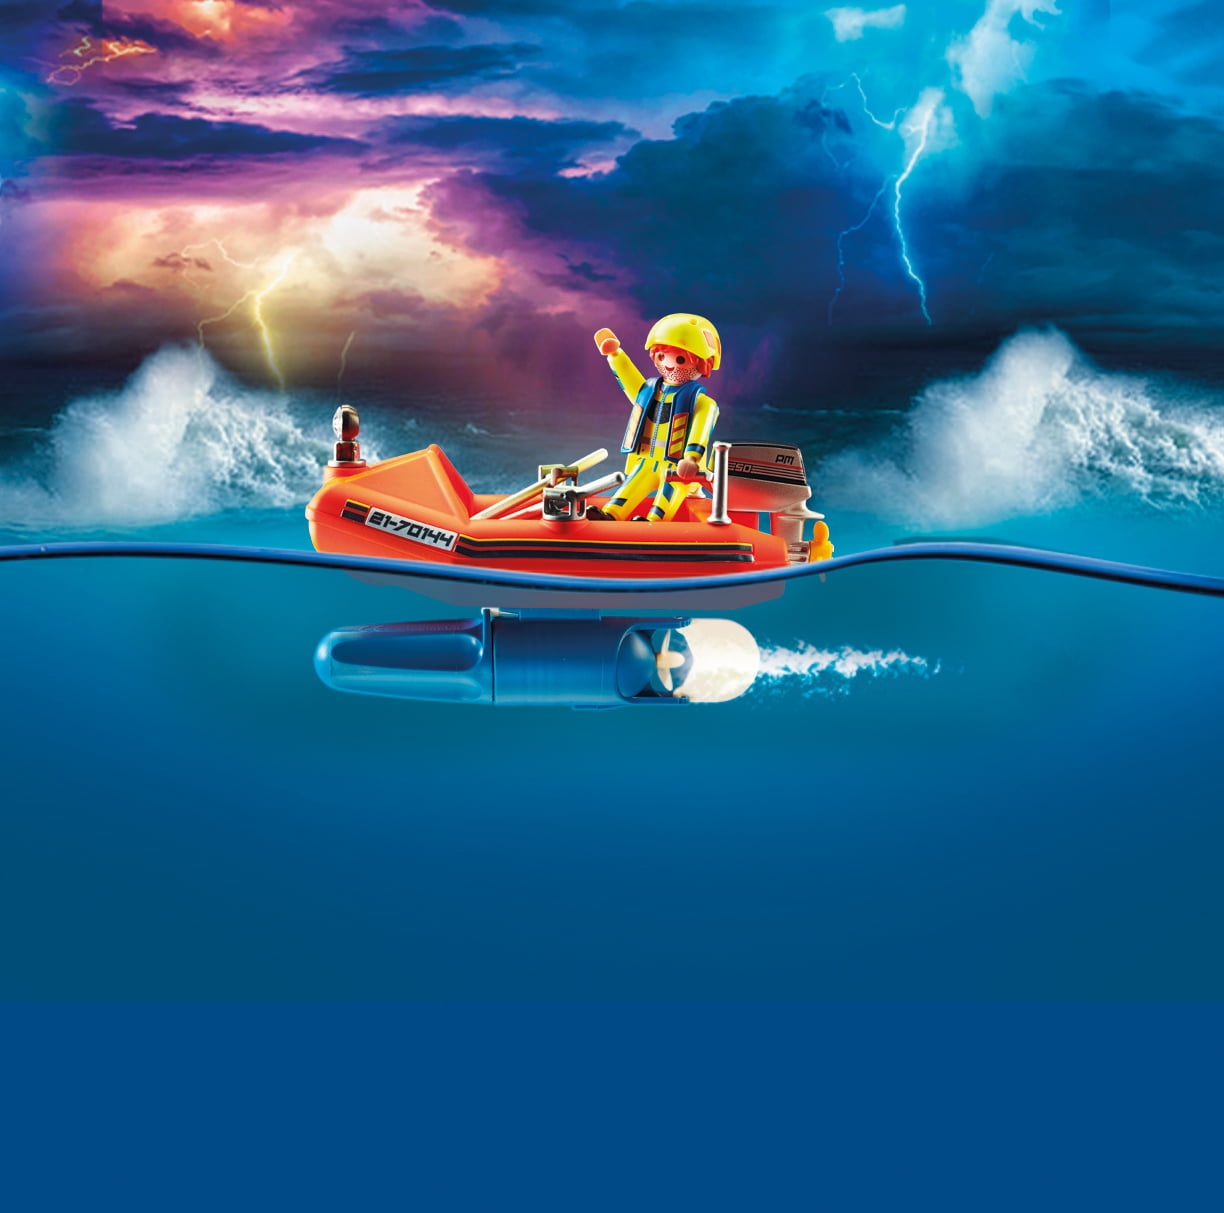 Playmobil City Action Kitesurfer Rescue with Speedboat Set